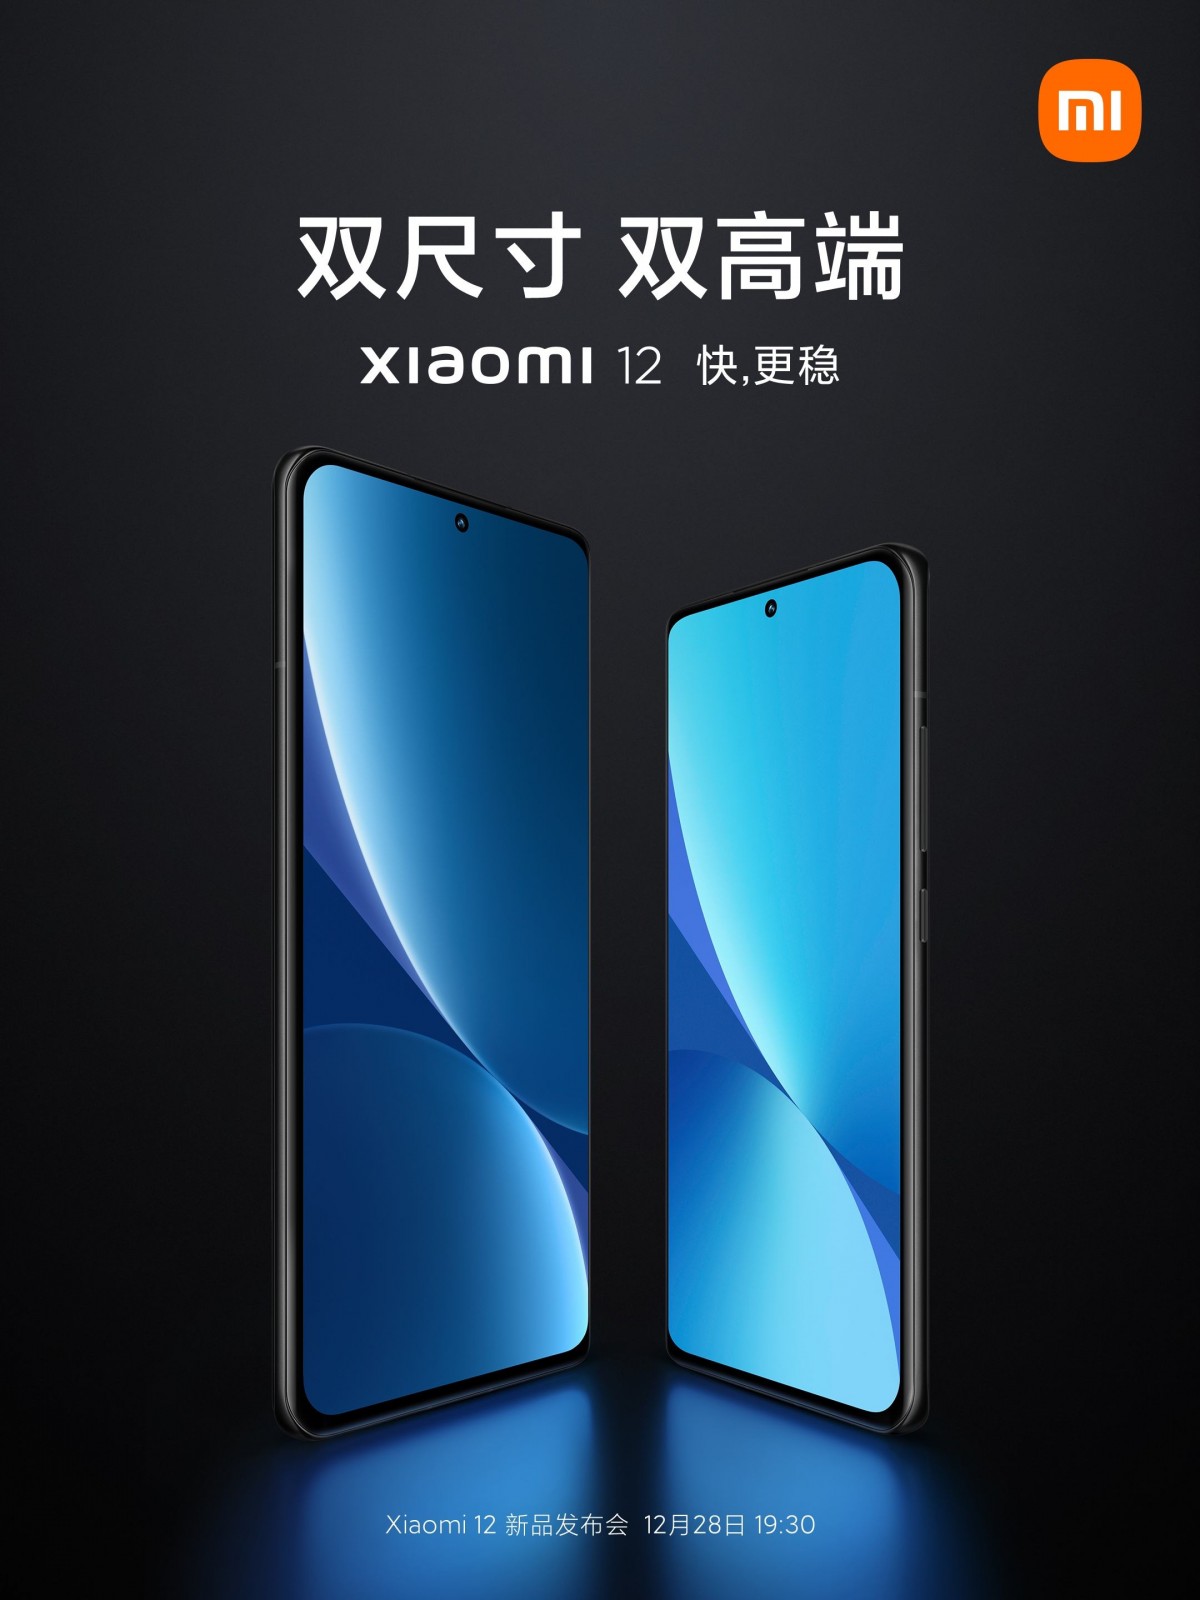 Xiaomi confirms only two flagships will launch on Dec 28